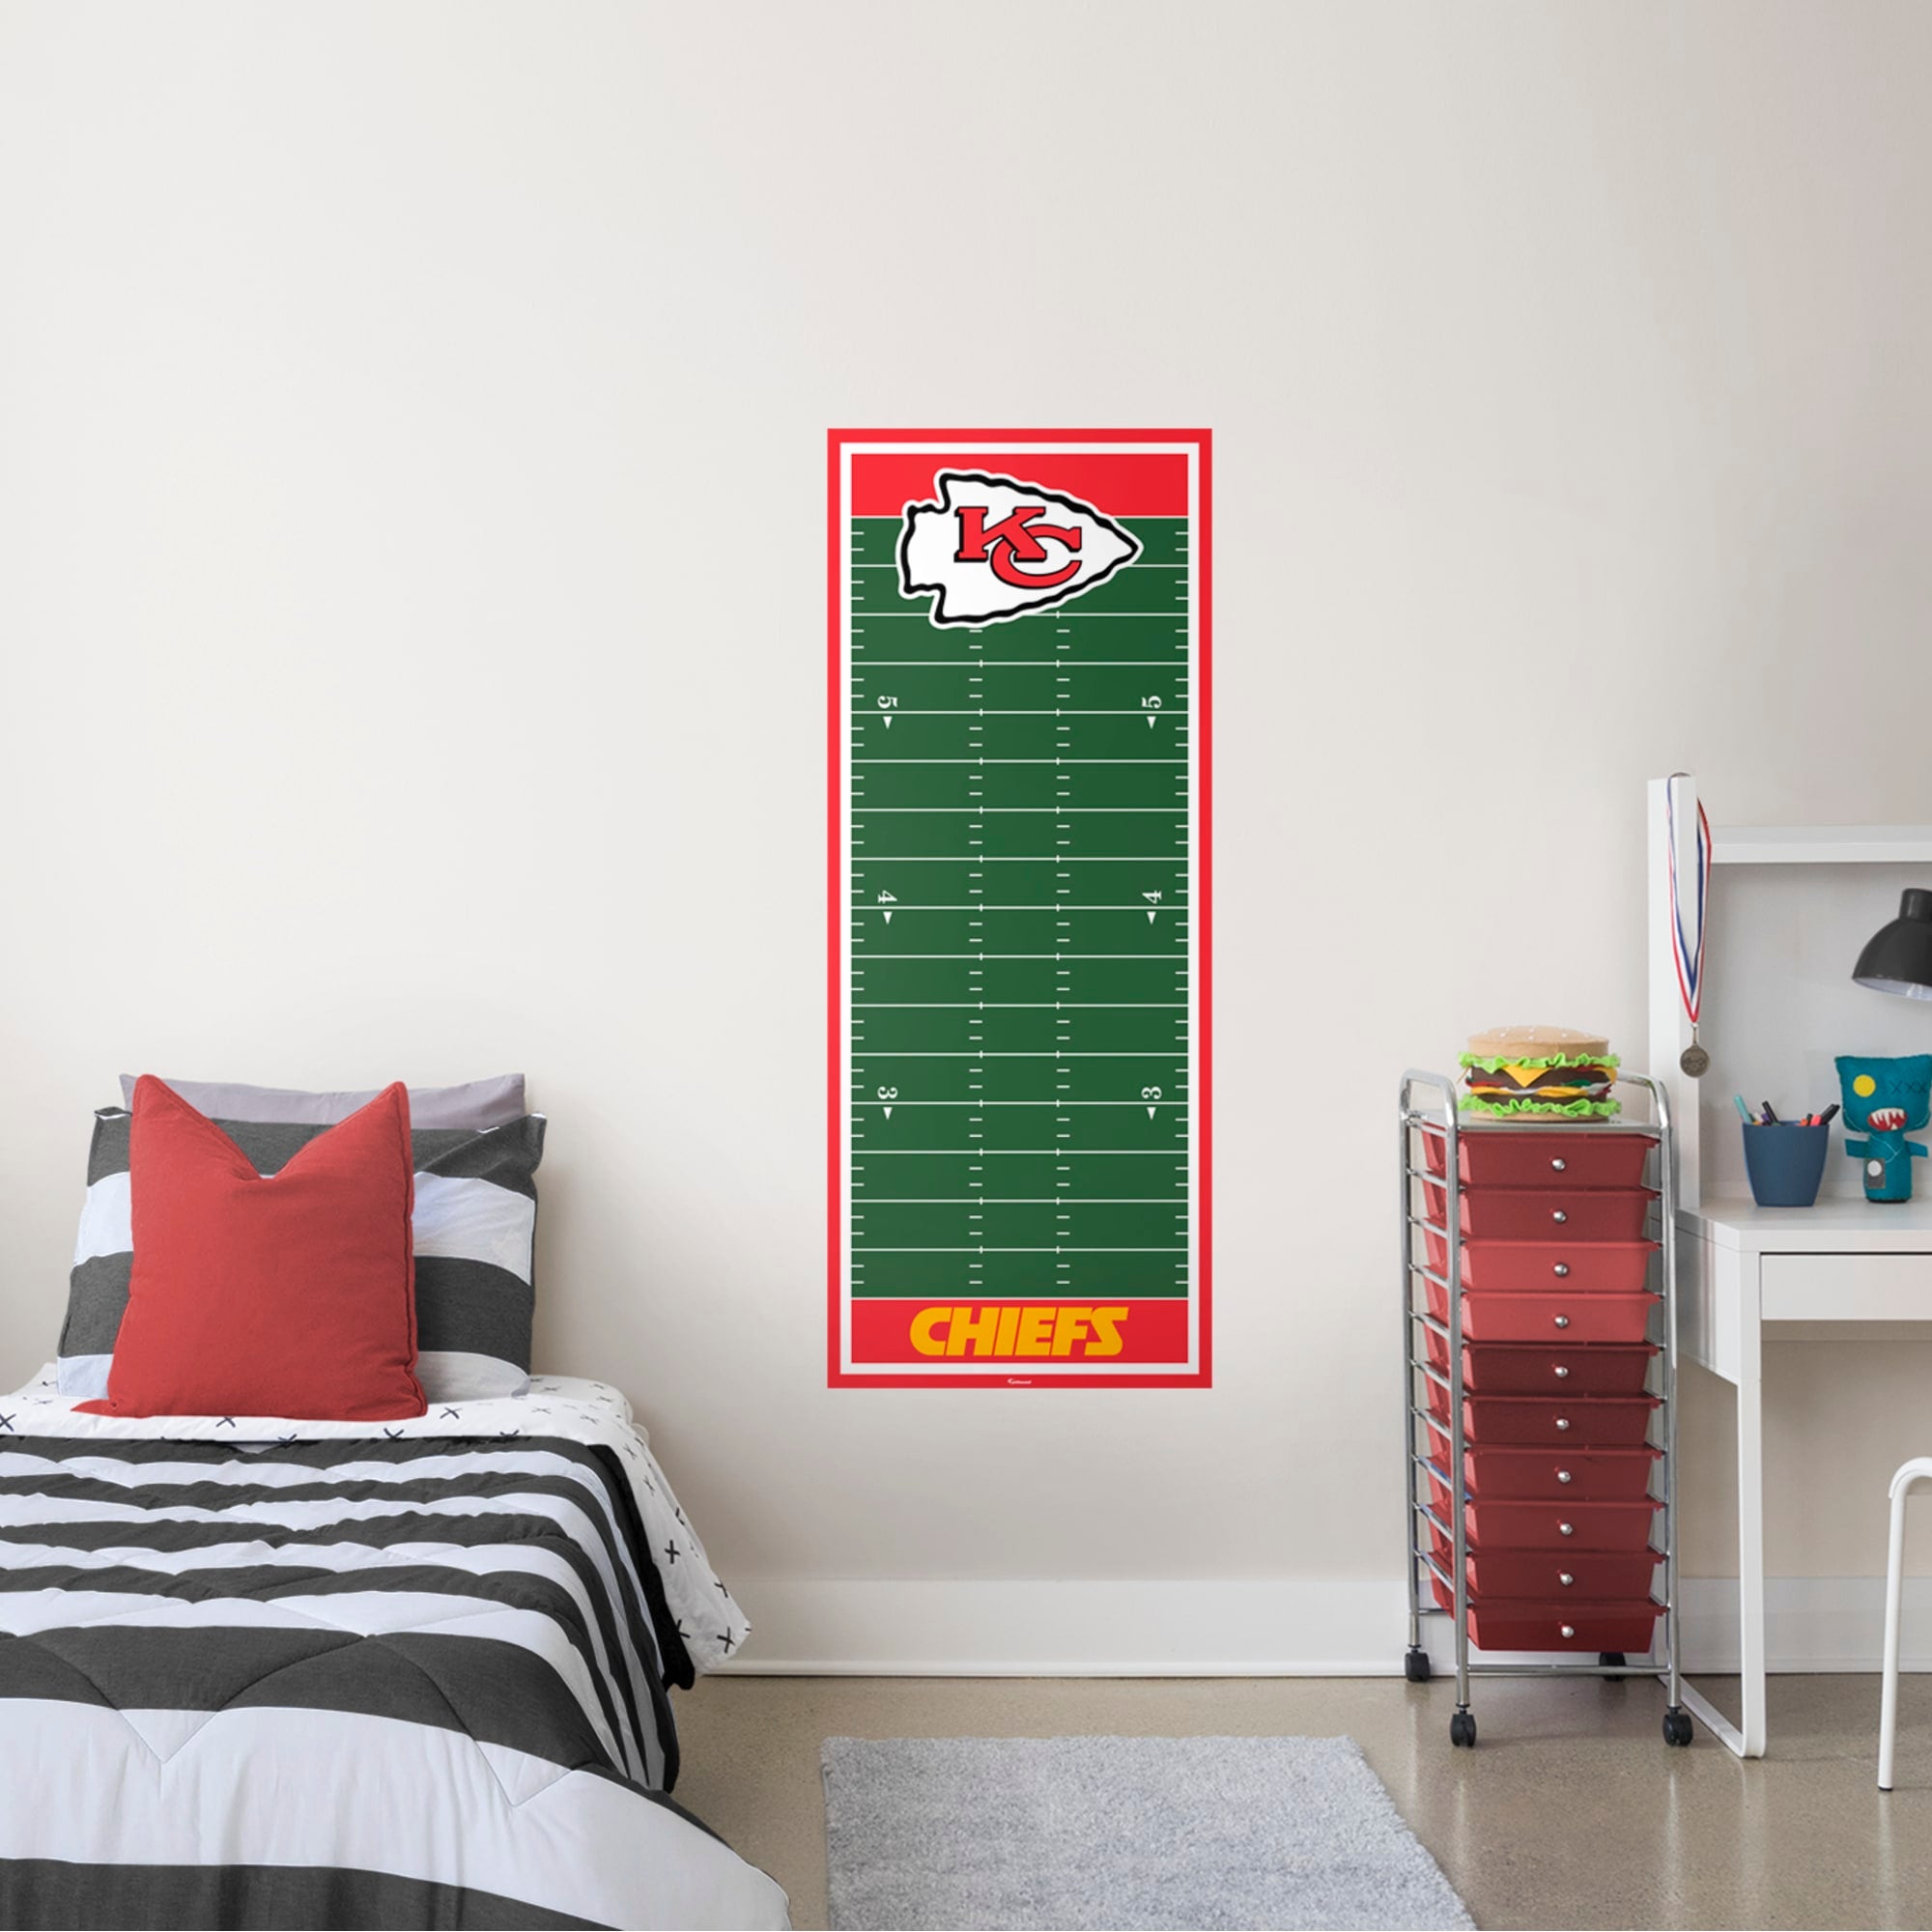 Kansas City Chiefs: Growth Chart - Officially Licensed NFL Removable Wall Graphic 24.0"W x 59.0"H by Fathead | Vinyl